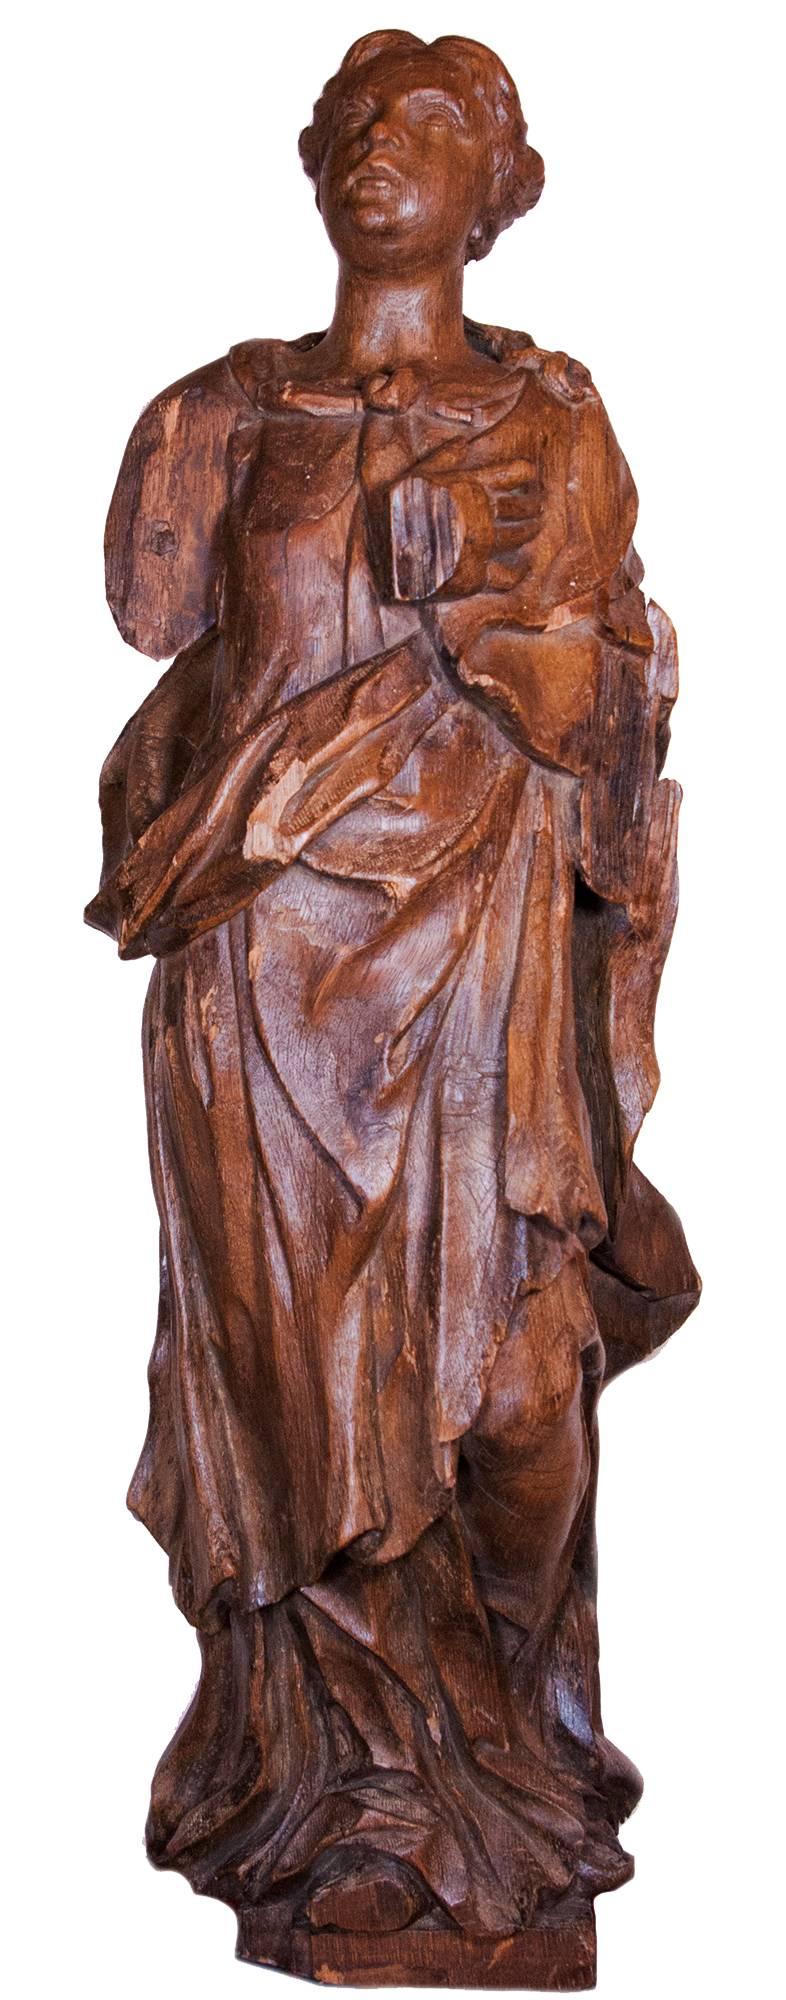 Pair Of Allegorical Figures In Oak, Circa 1730 - Baroque Sculpture by Unknown